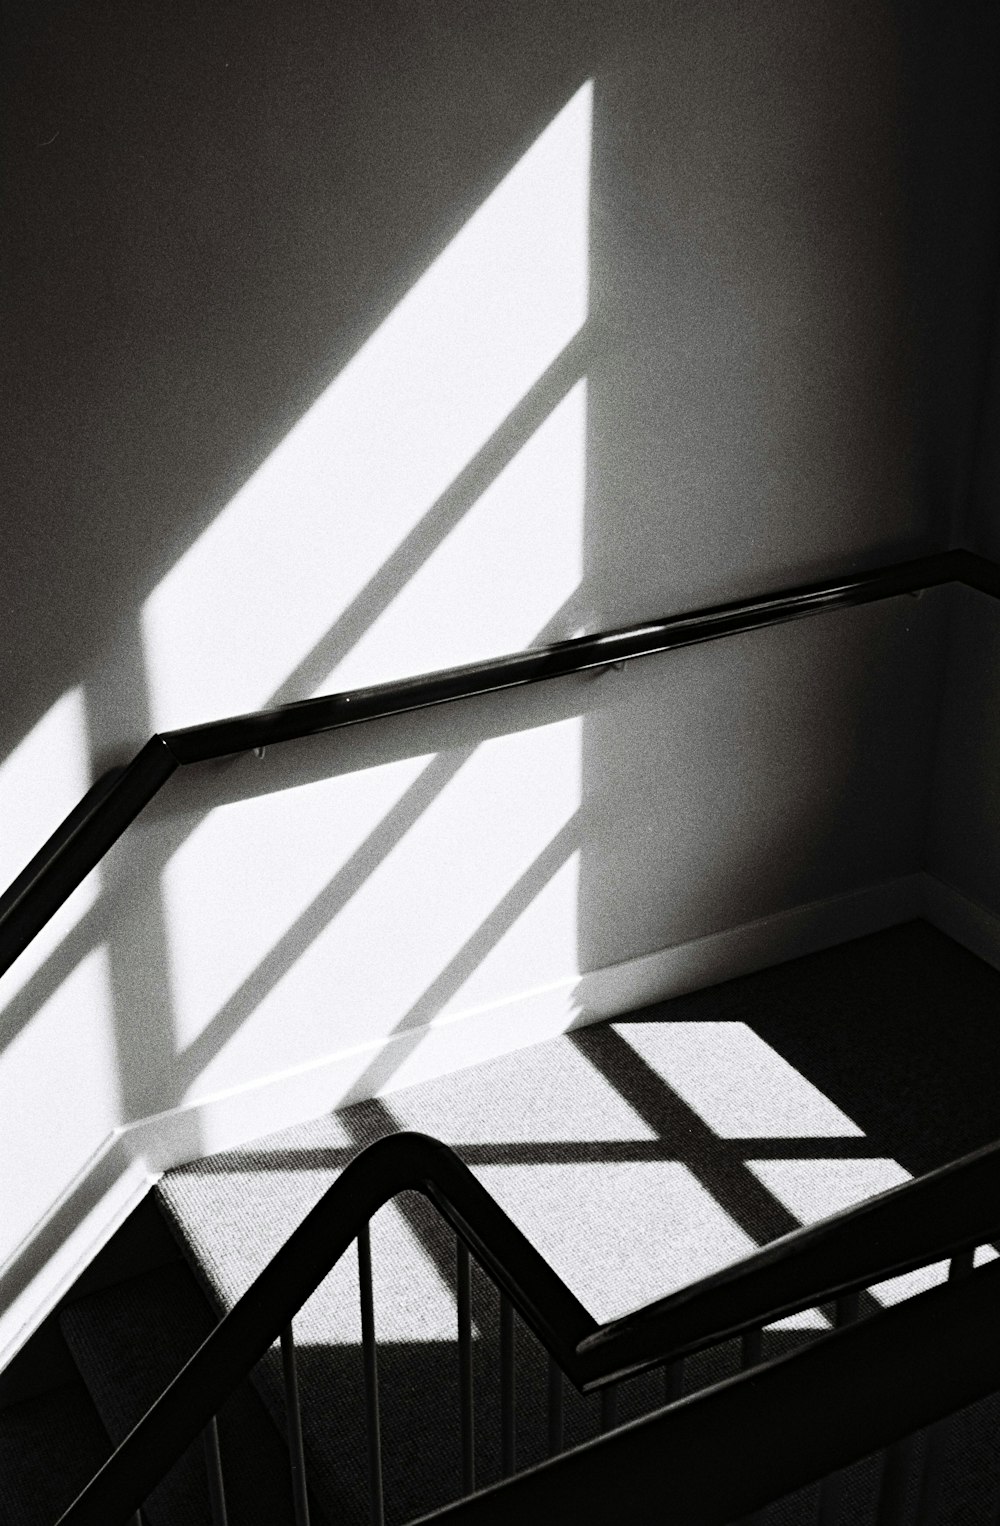 grayscale photo of stairs and handrail